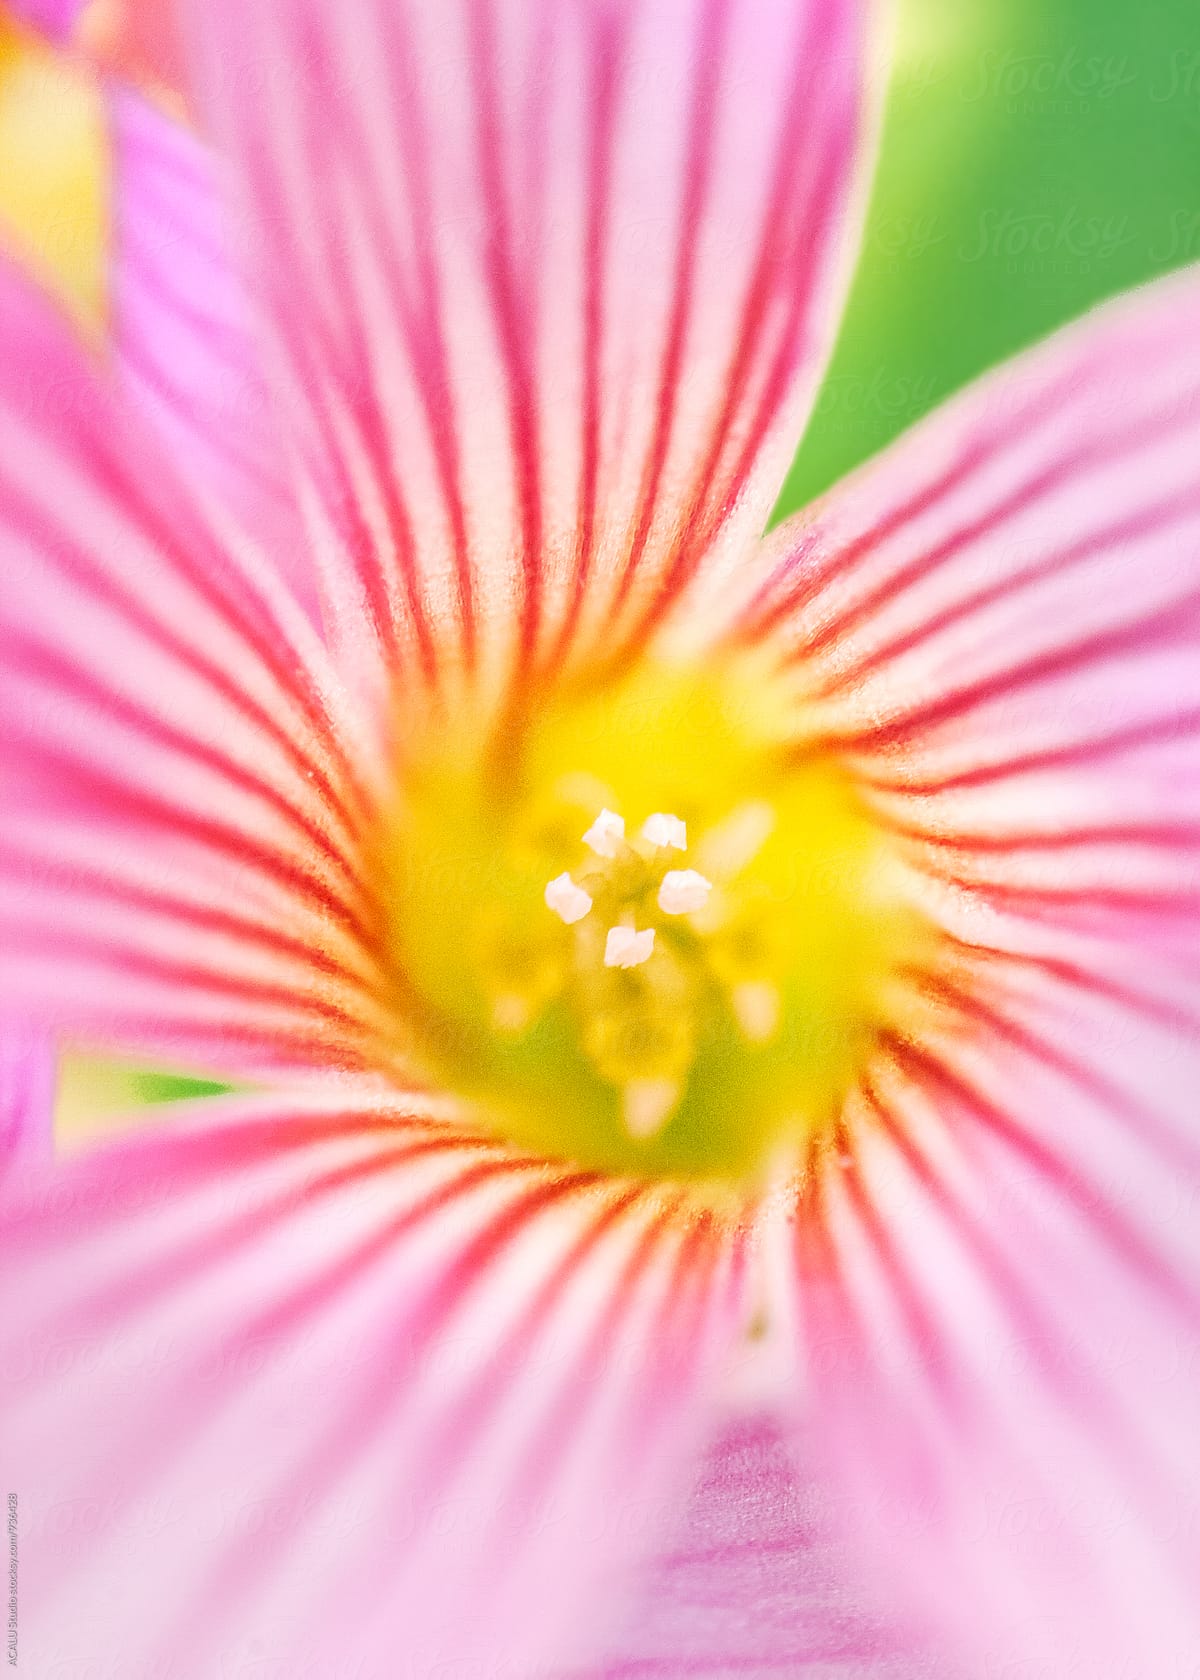 Pink flower with lines and yellow center